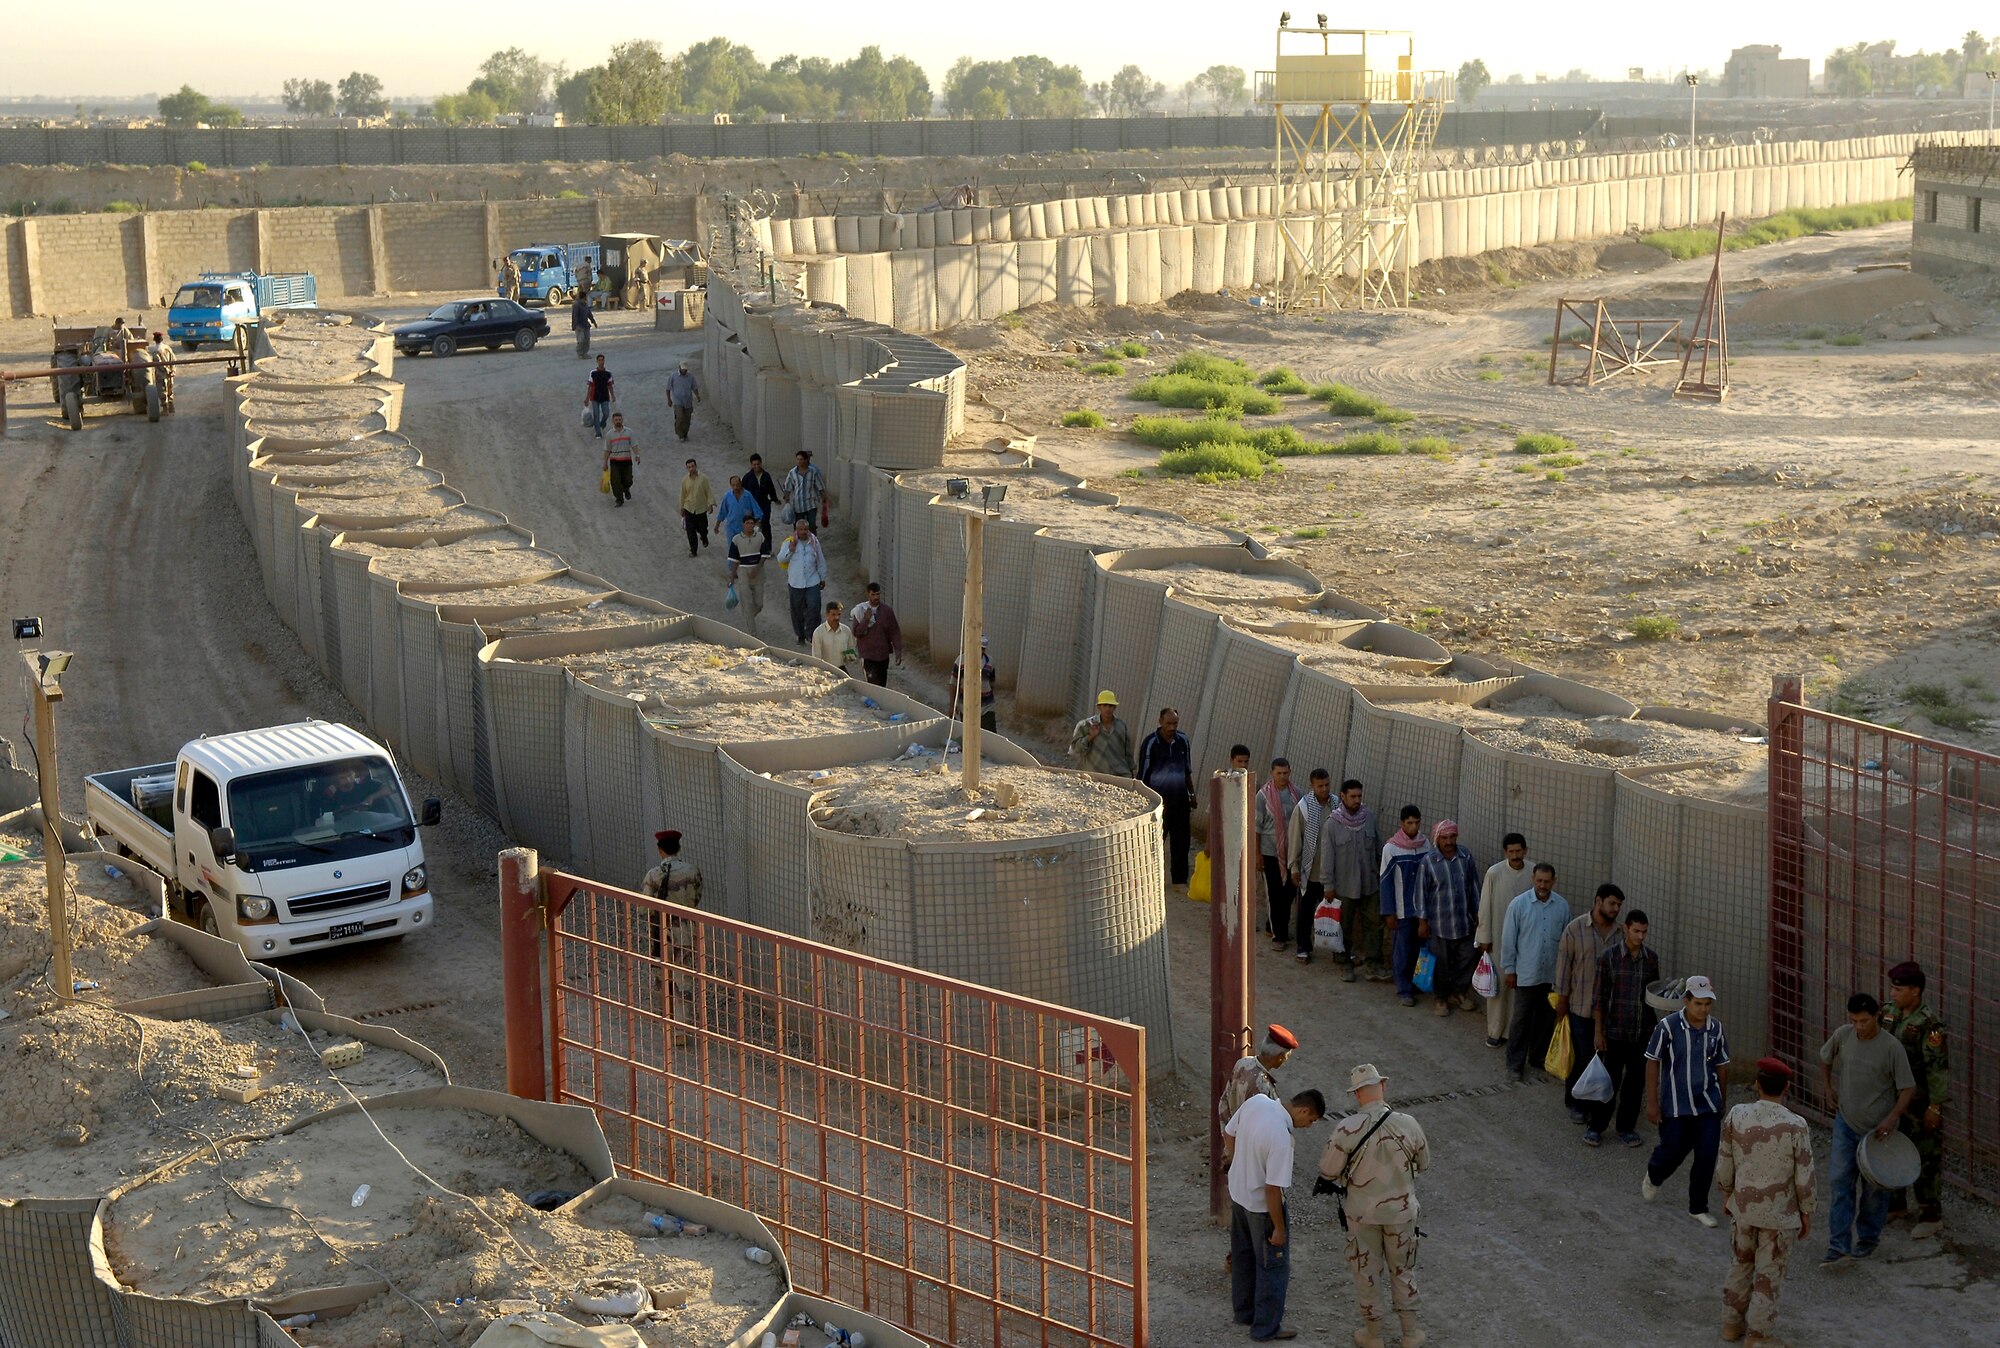 Workers line up to enter Ar Rasheed Base, Iraq, on Friday, May 26, 2006. Hundreds of workers enter the base daily. The soldiers search every person and vehicle that enters. Each soldier is trained and advised by five security forces Airmen and their Army commander who live and work on the base. (U.S. Air Force photo/Senior Airman Brian Ferguson)